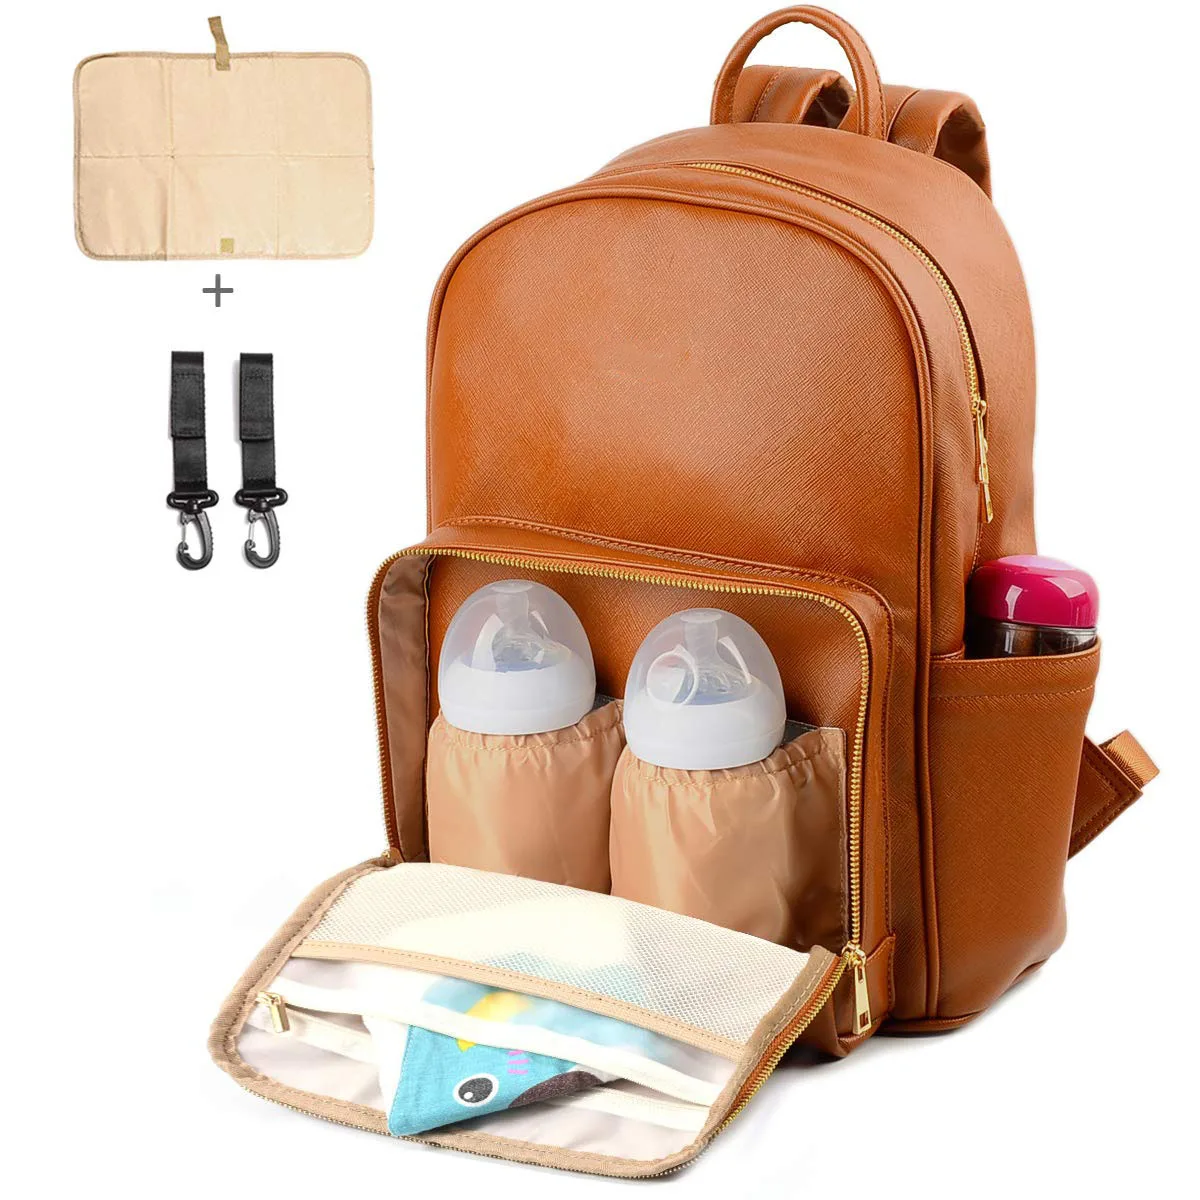 

Premium pu Leather Diaper Bag Backpack,brown Diaper Backpack with Changing Pad,stylish design vegan leather baby bag nappy bag, Customized colors